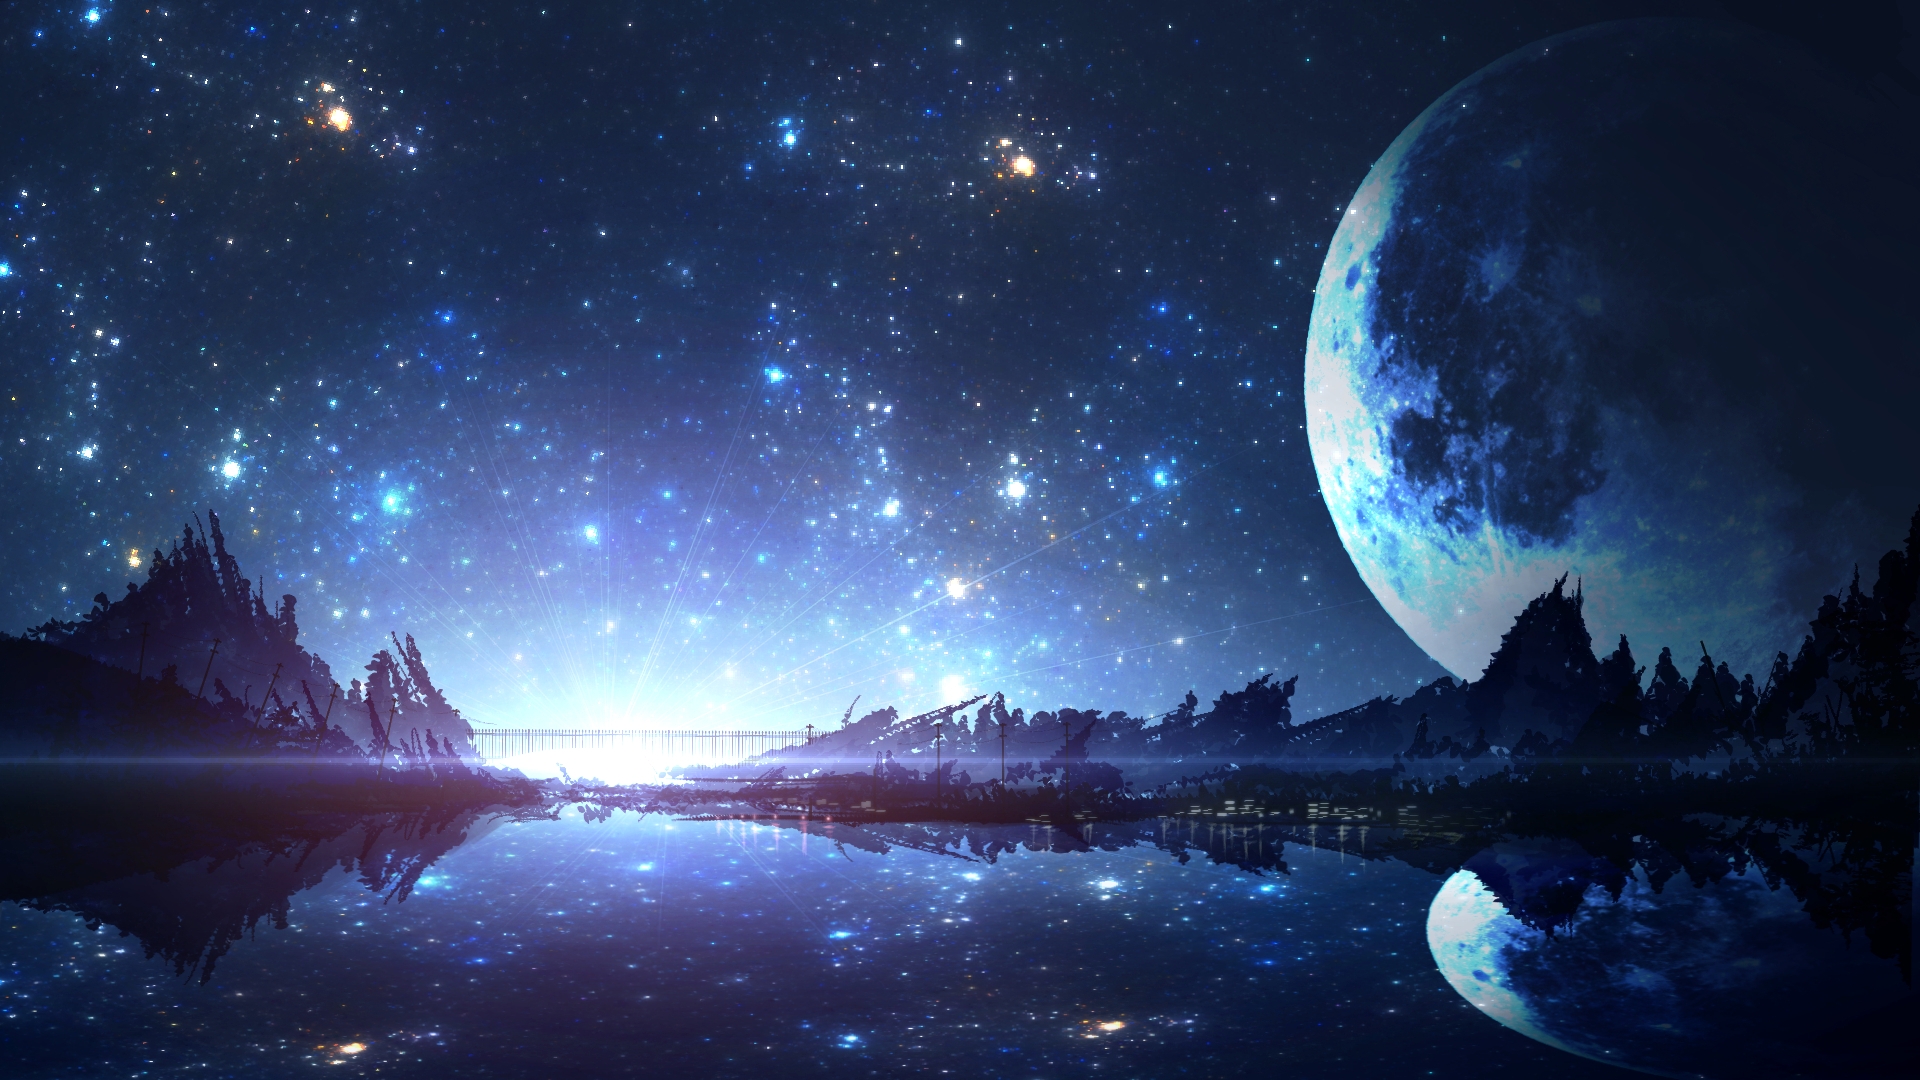 Wallpapers moon reflection river on the desktop